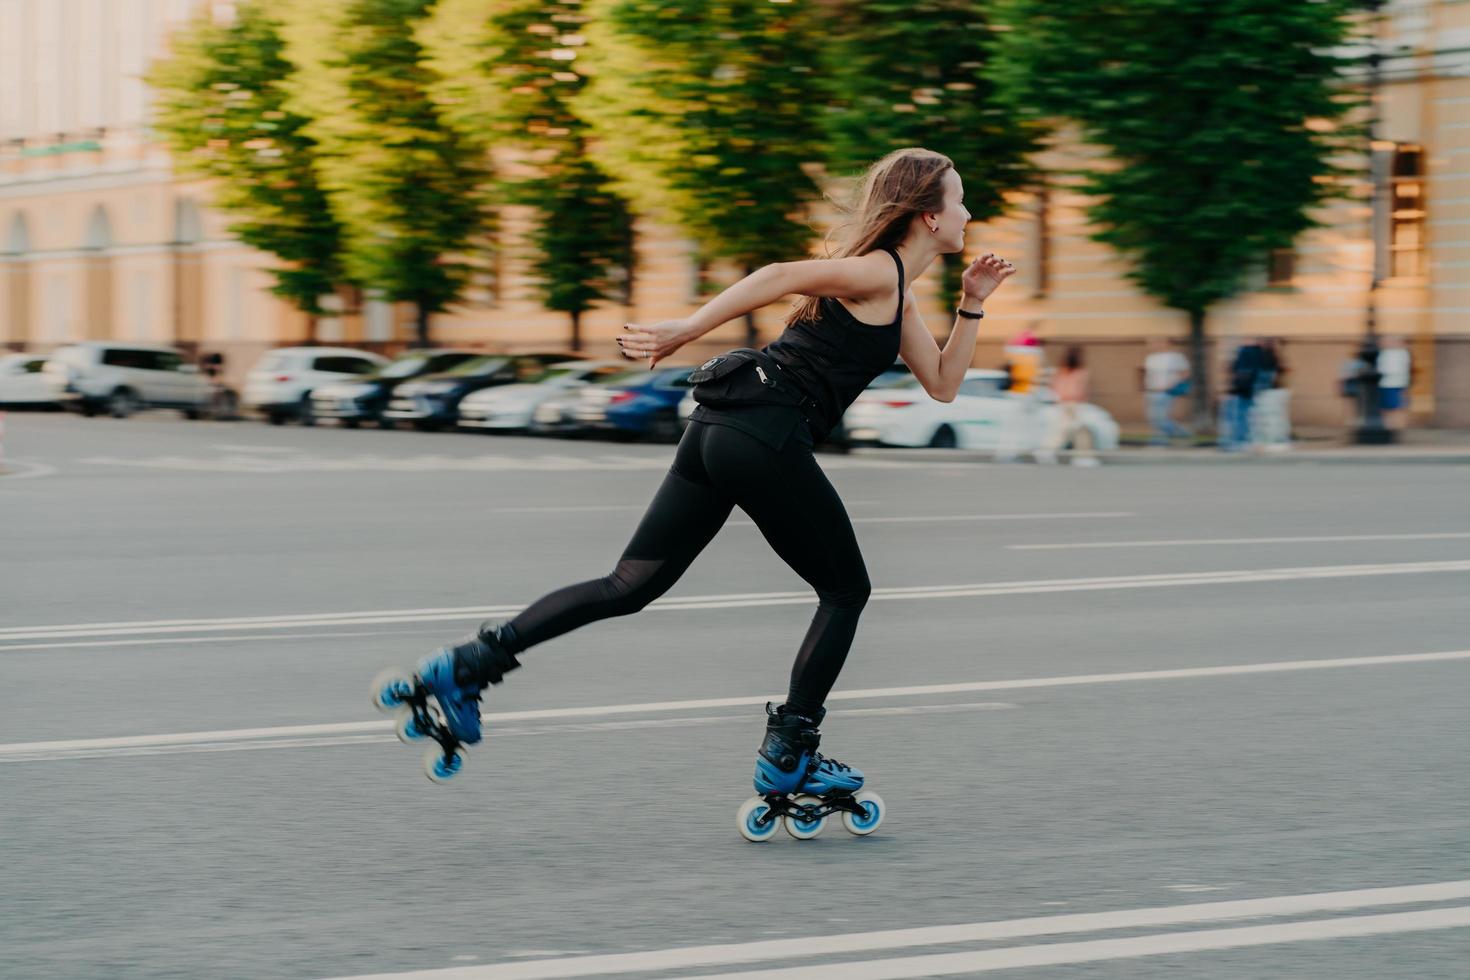 Professional female roller demonstrates her abilities of rollerblading rides very quckly on road along city enjoys sunny day dressed in black active wear. Active lifestyle hobby and fitness activity photo